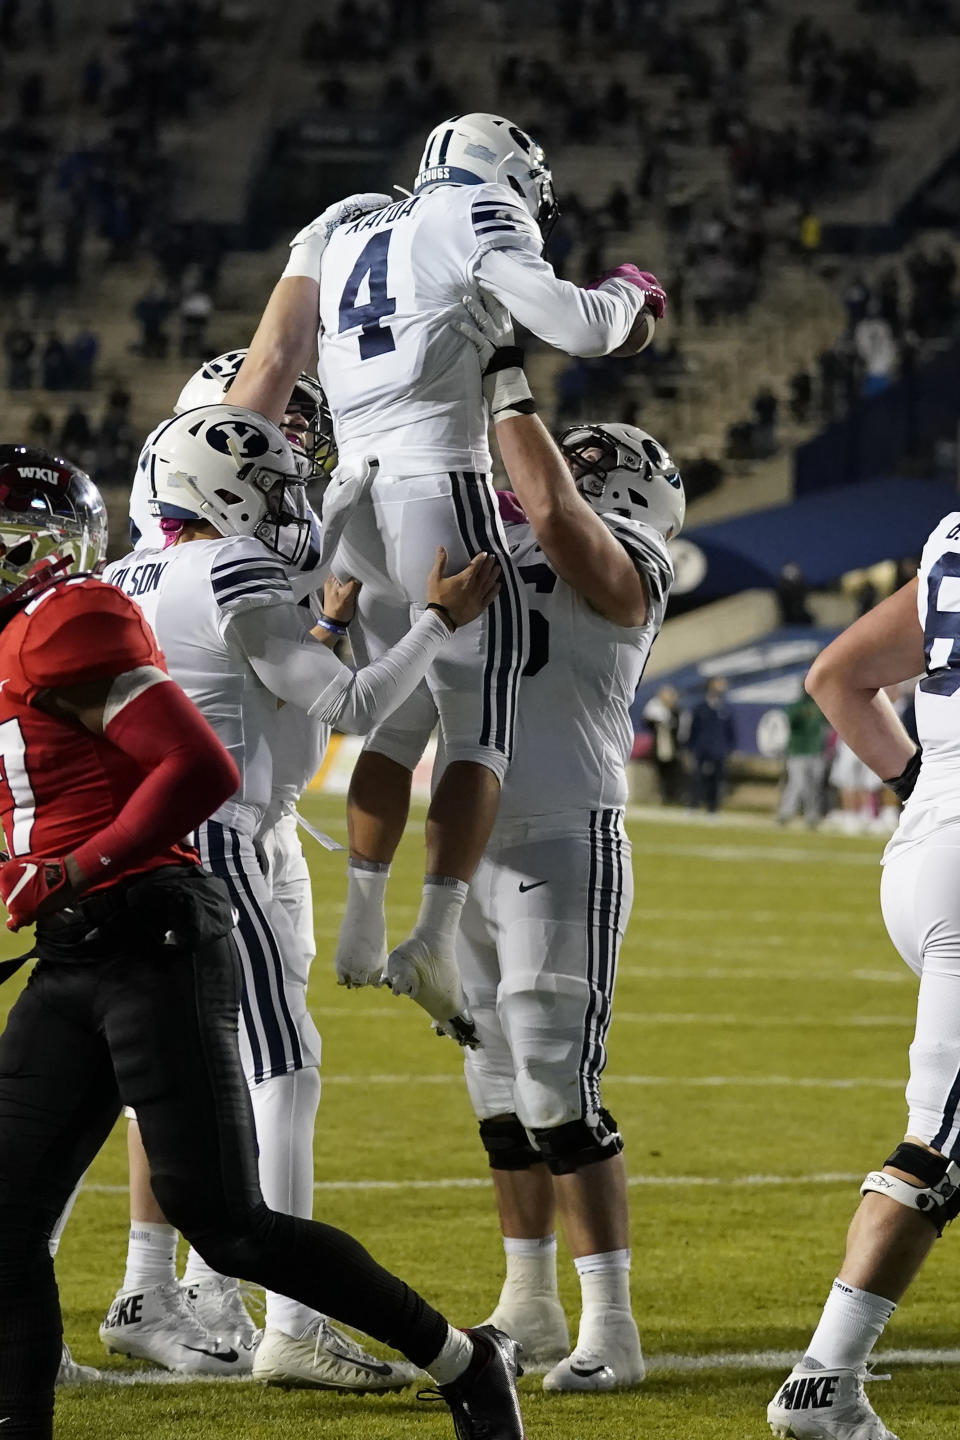 BYU running back Lopini Katoa (4) celebrates with teammates after scoring against Western Kentucky during the first half of an NCAA college football game Saturday, Oct. 31, 2020, in Provo, Utah. (AP Photo/Rick Bowmer, Pool)